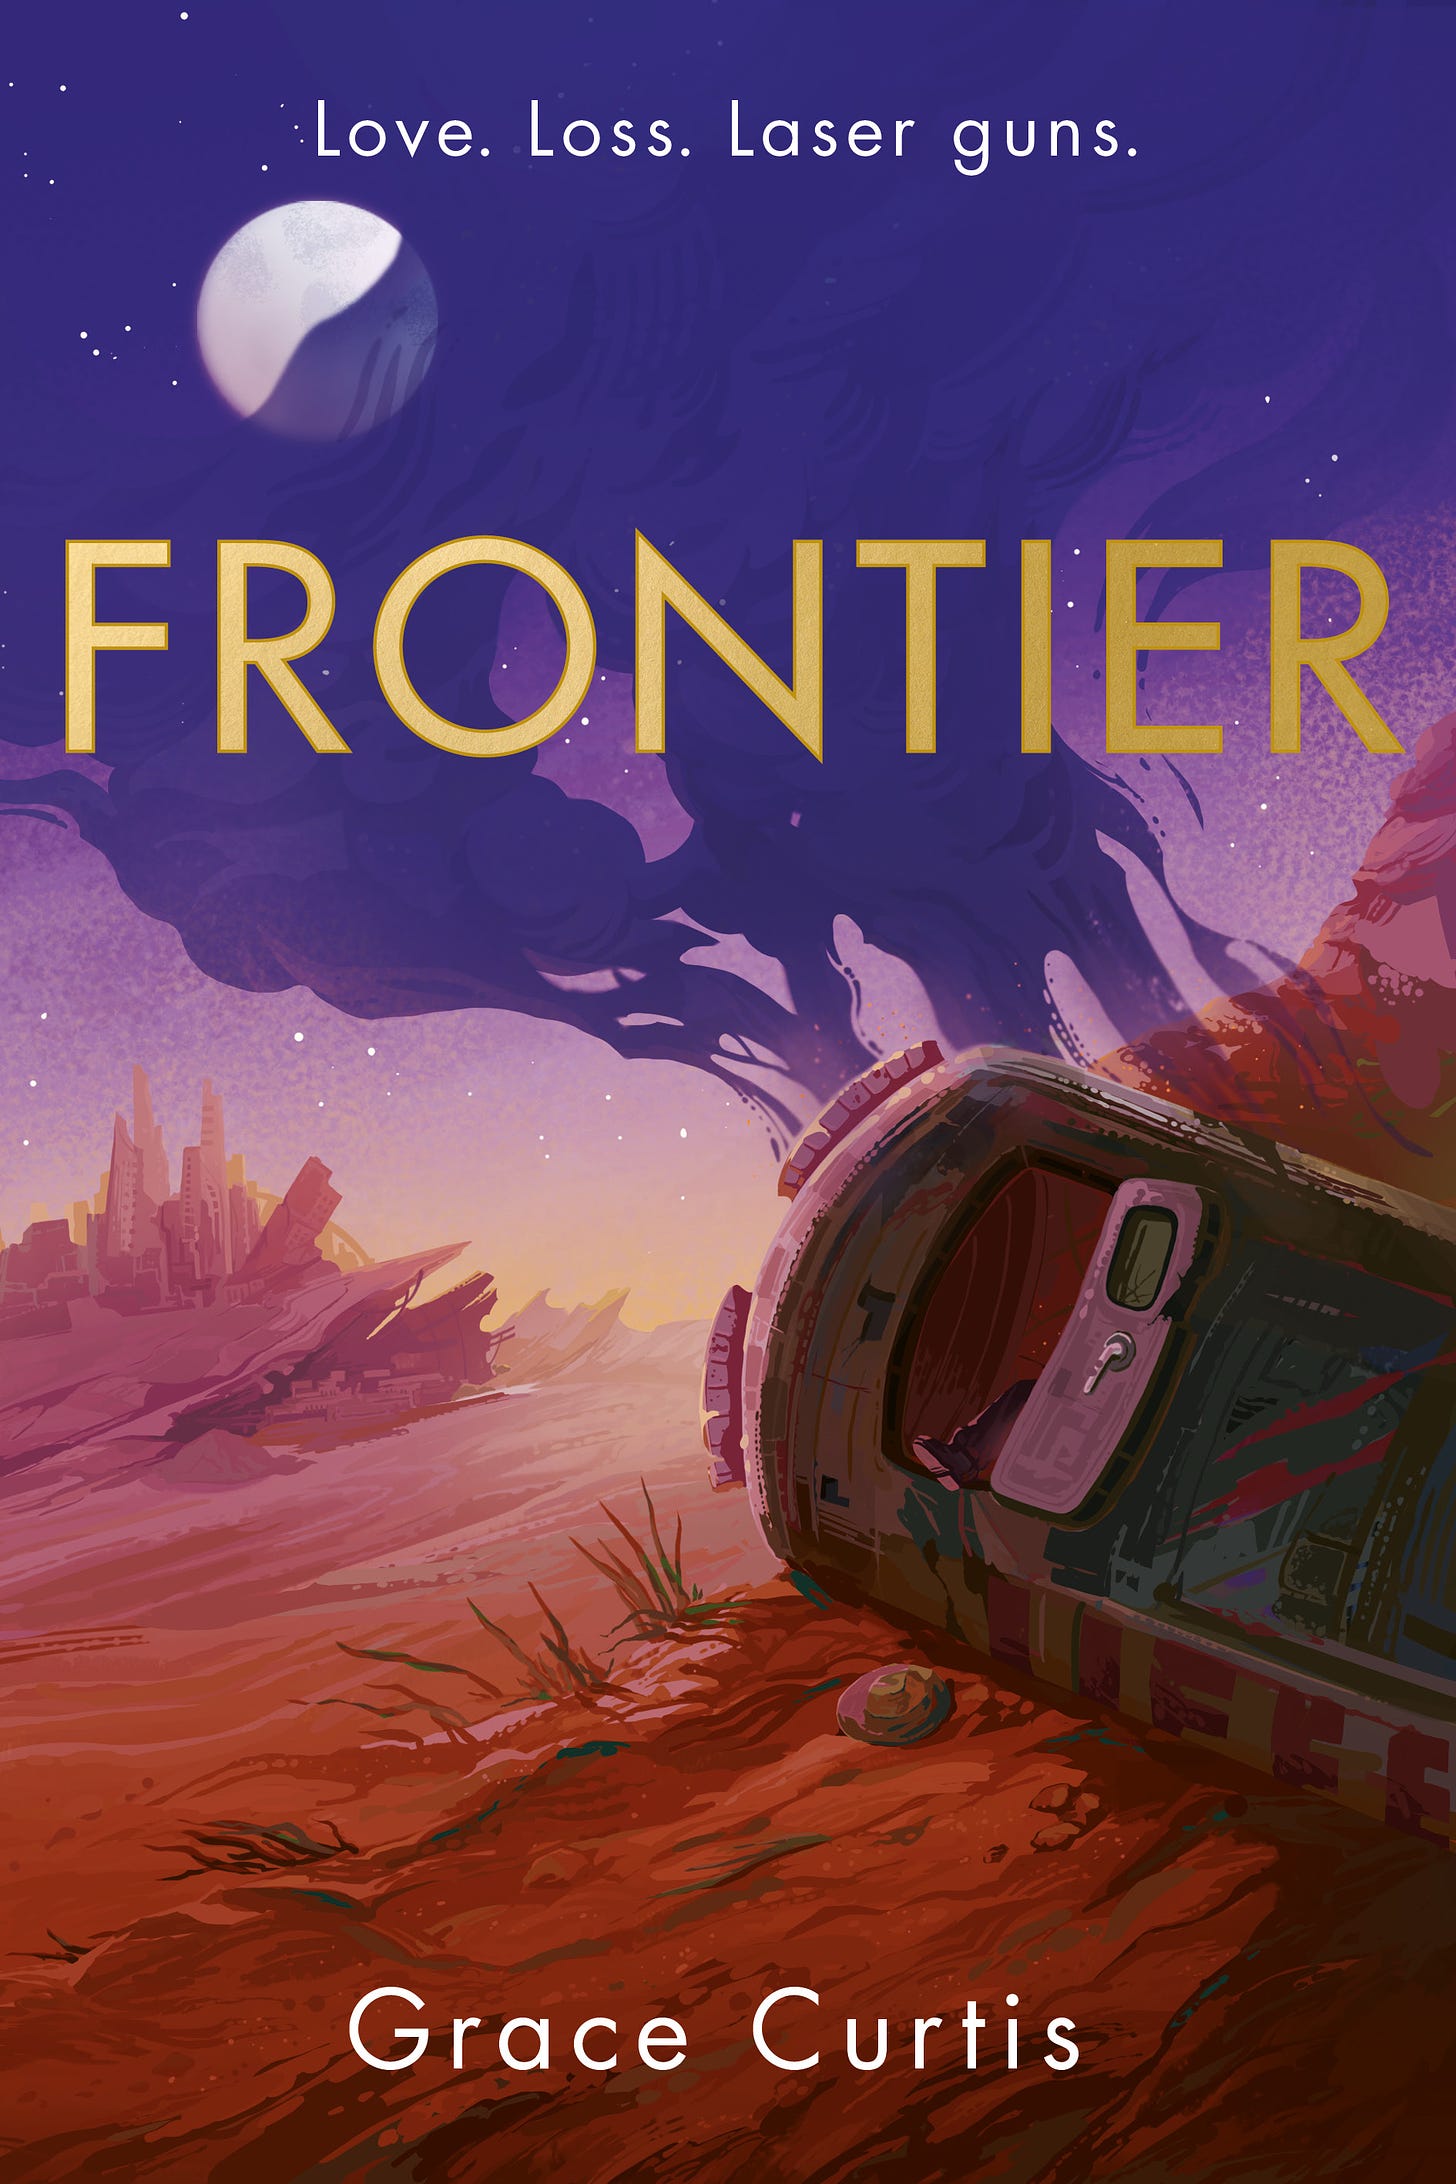 Frontier by Grace Curtis | Goodreads